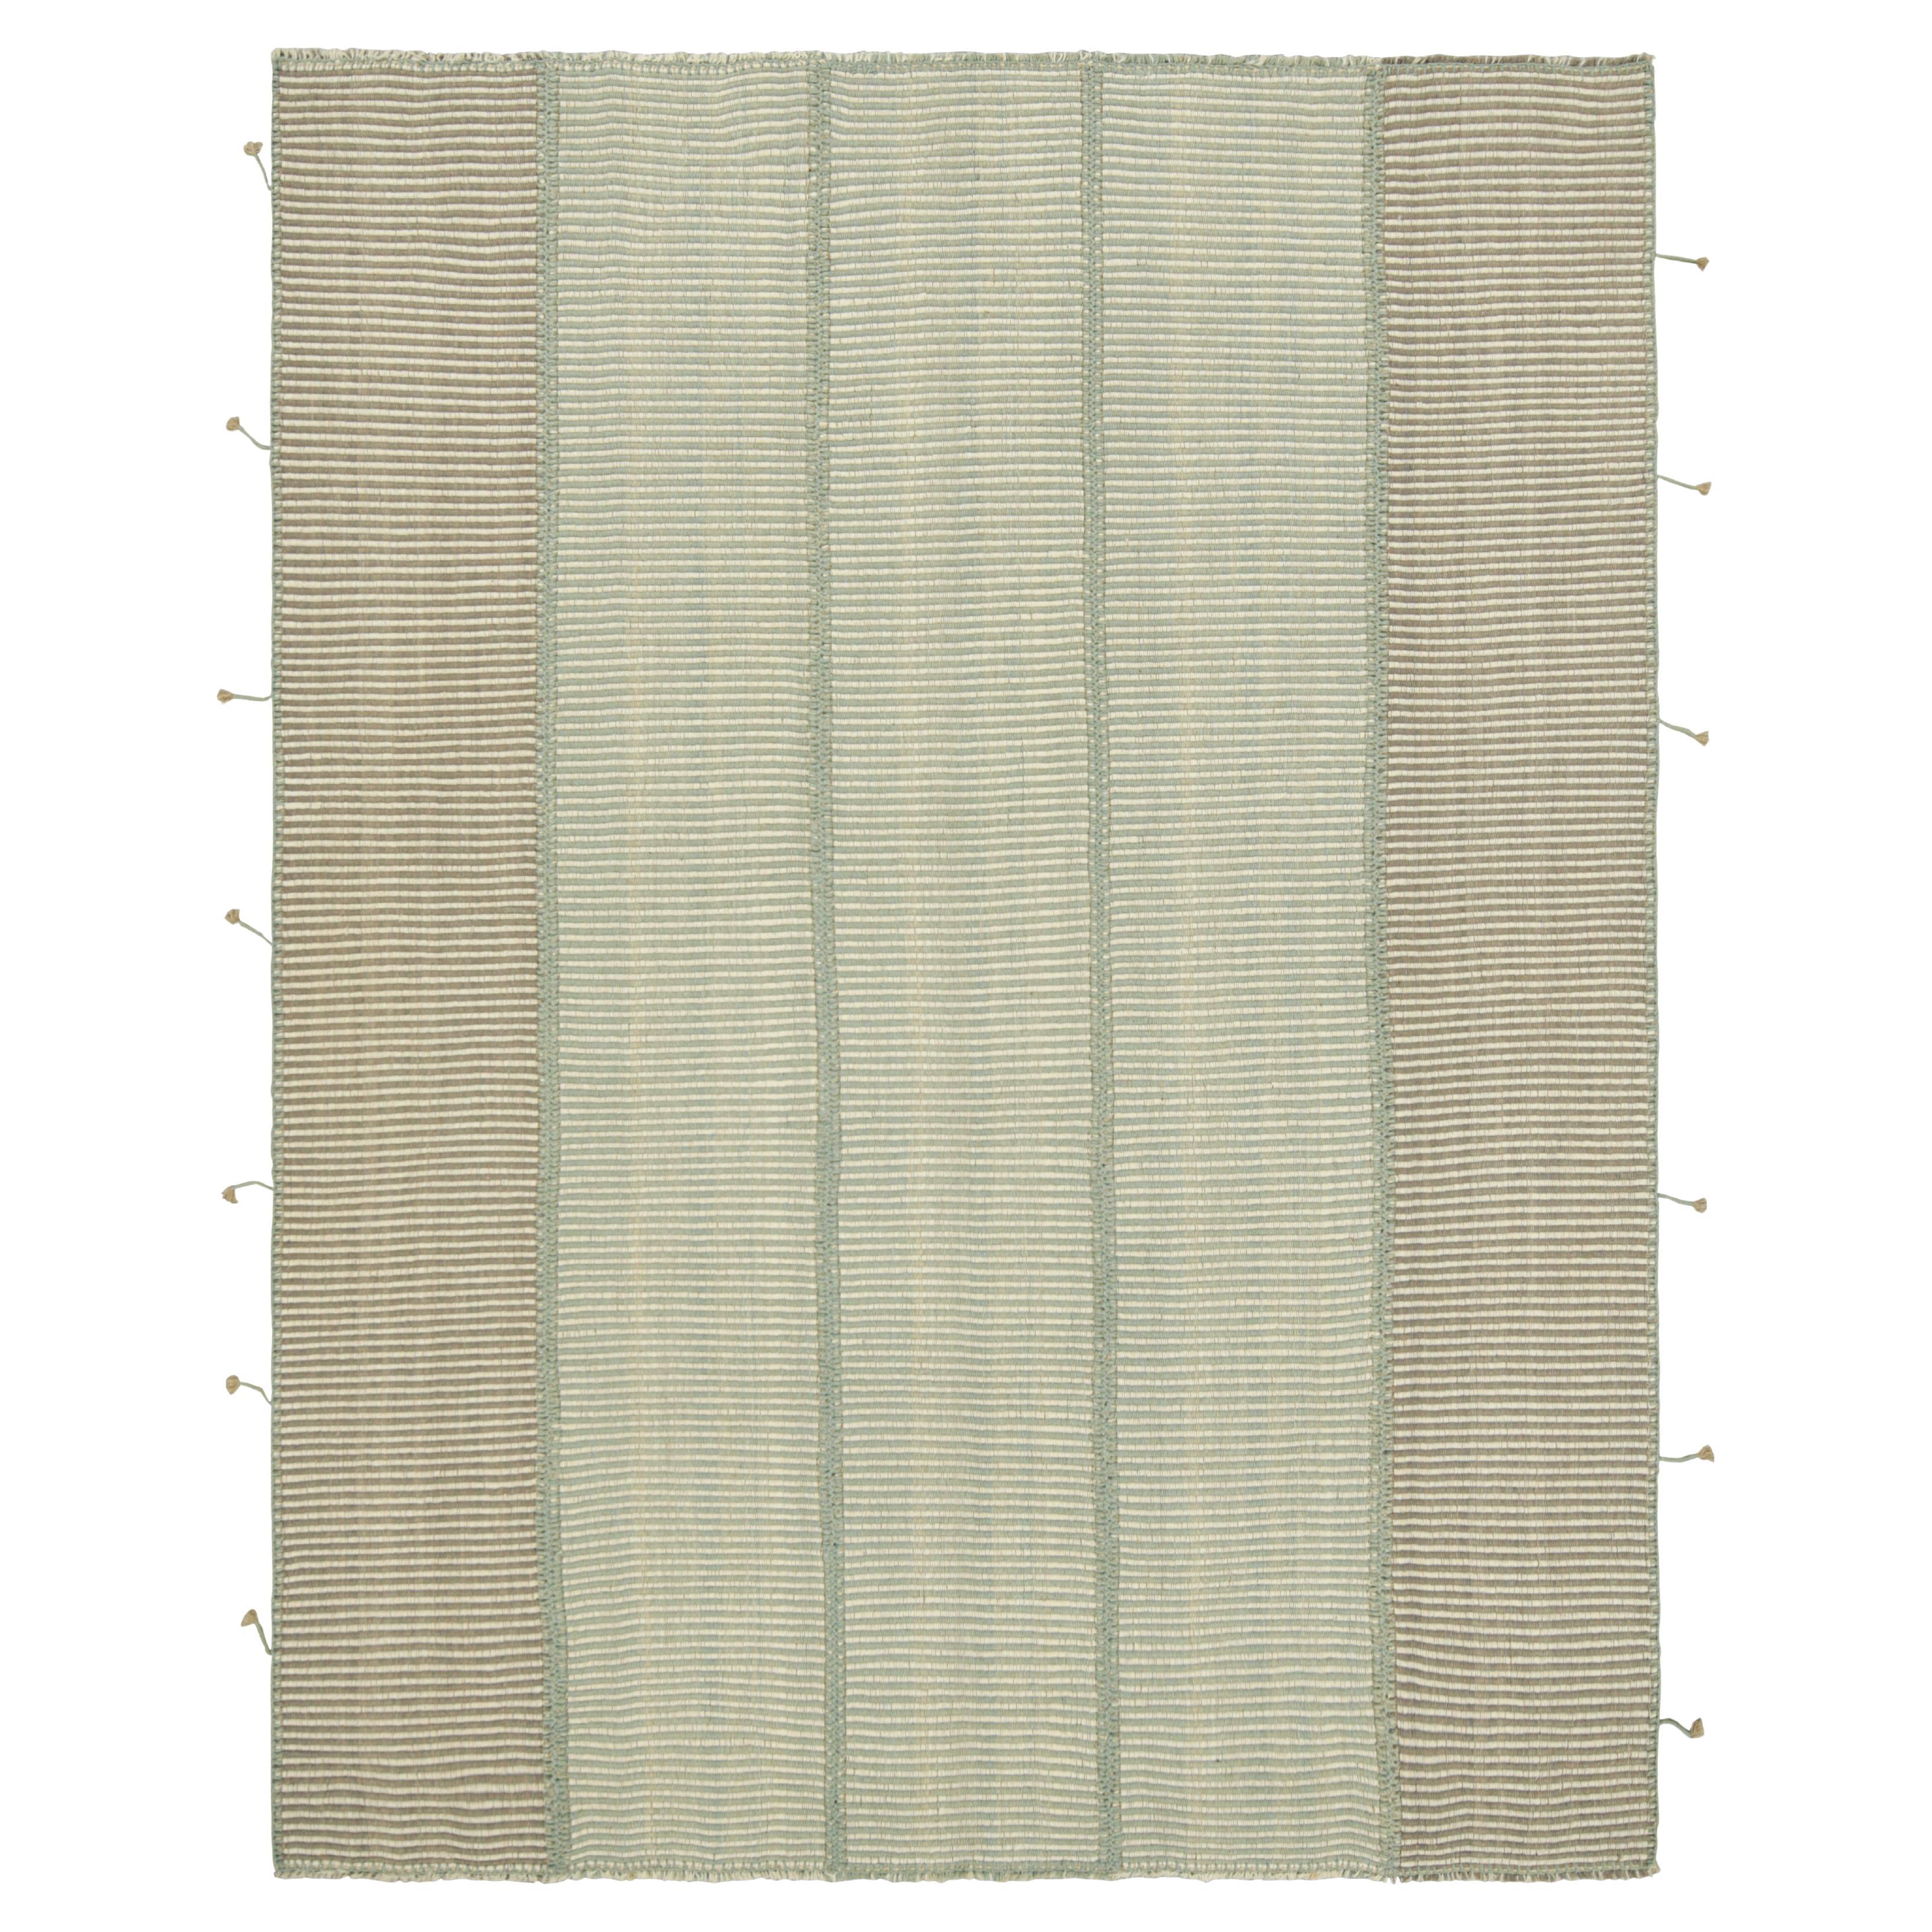 Rug & Kilim’s Contemporary Kilim in Cream and Blue Textural Stripes For Sale